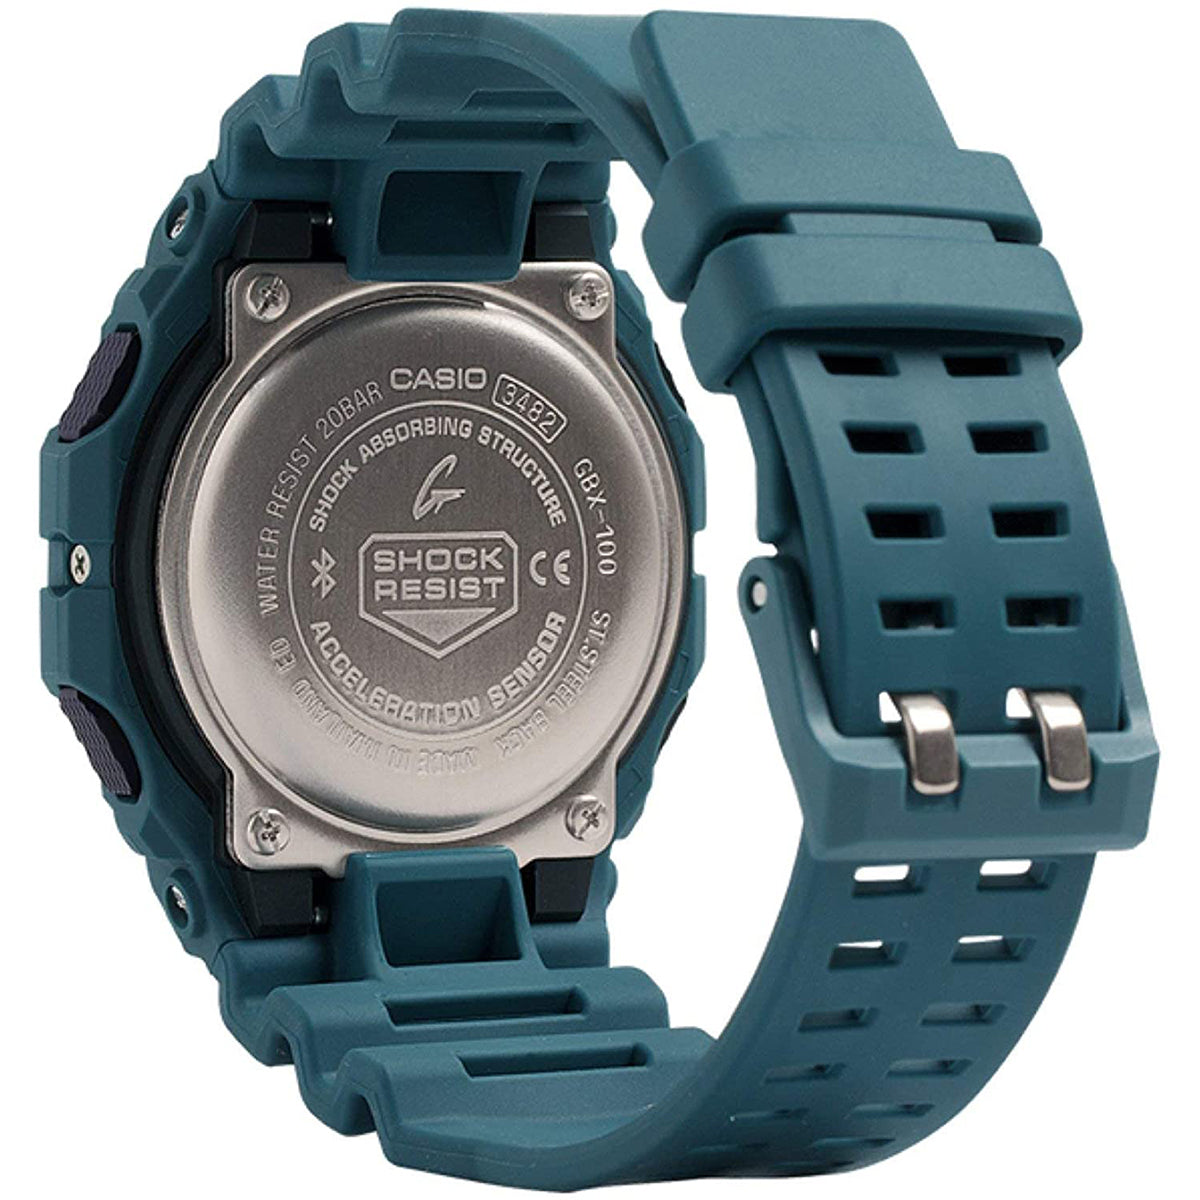 G-Shock - GBX-100-2DR (Made in Thailand)